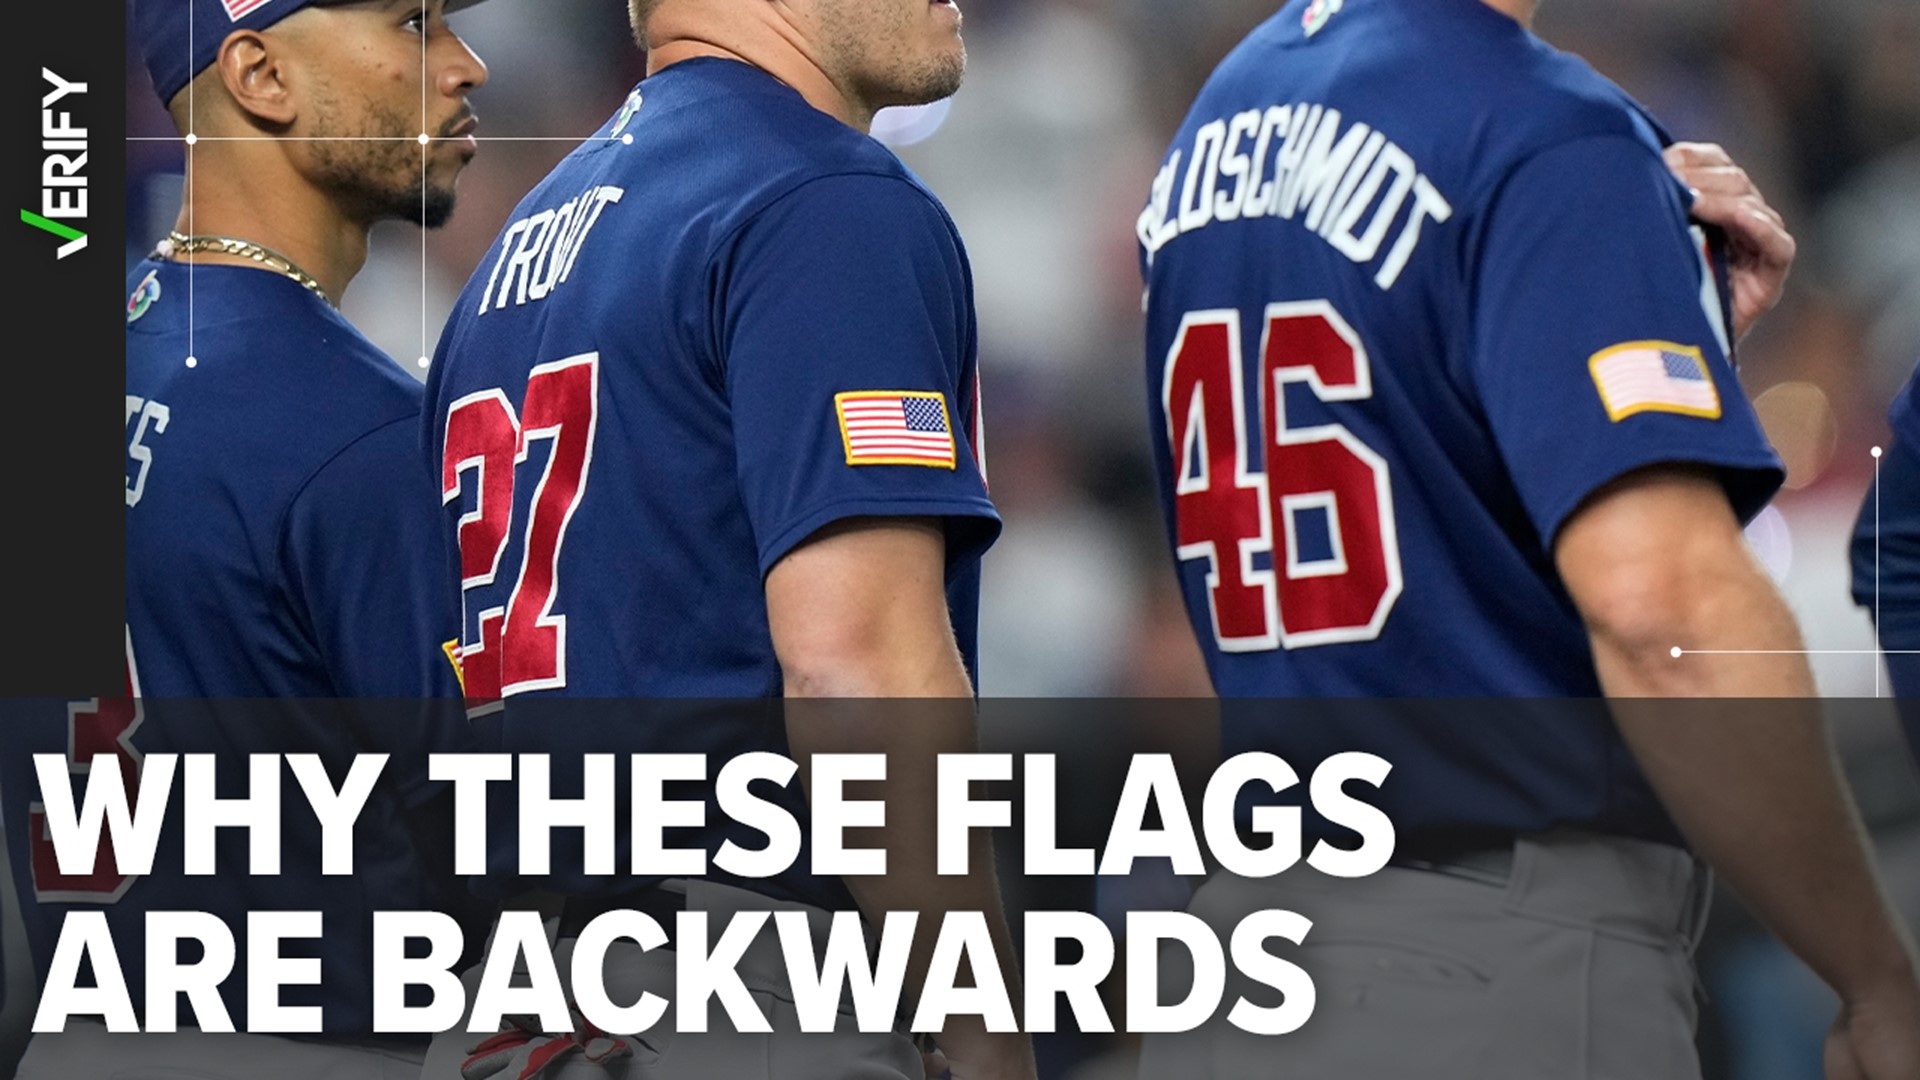 Baseball teams and U.S. military alike wear flag patches with the stars facing right, making them look flipped or reversed.